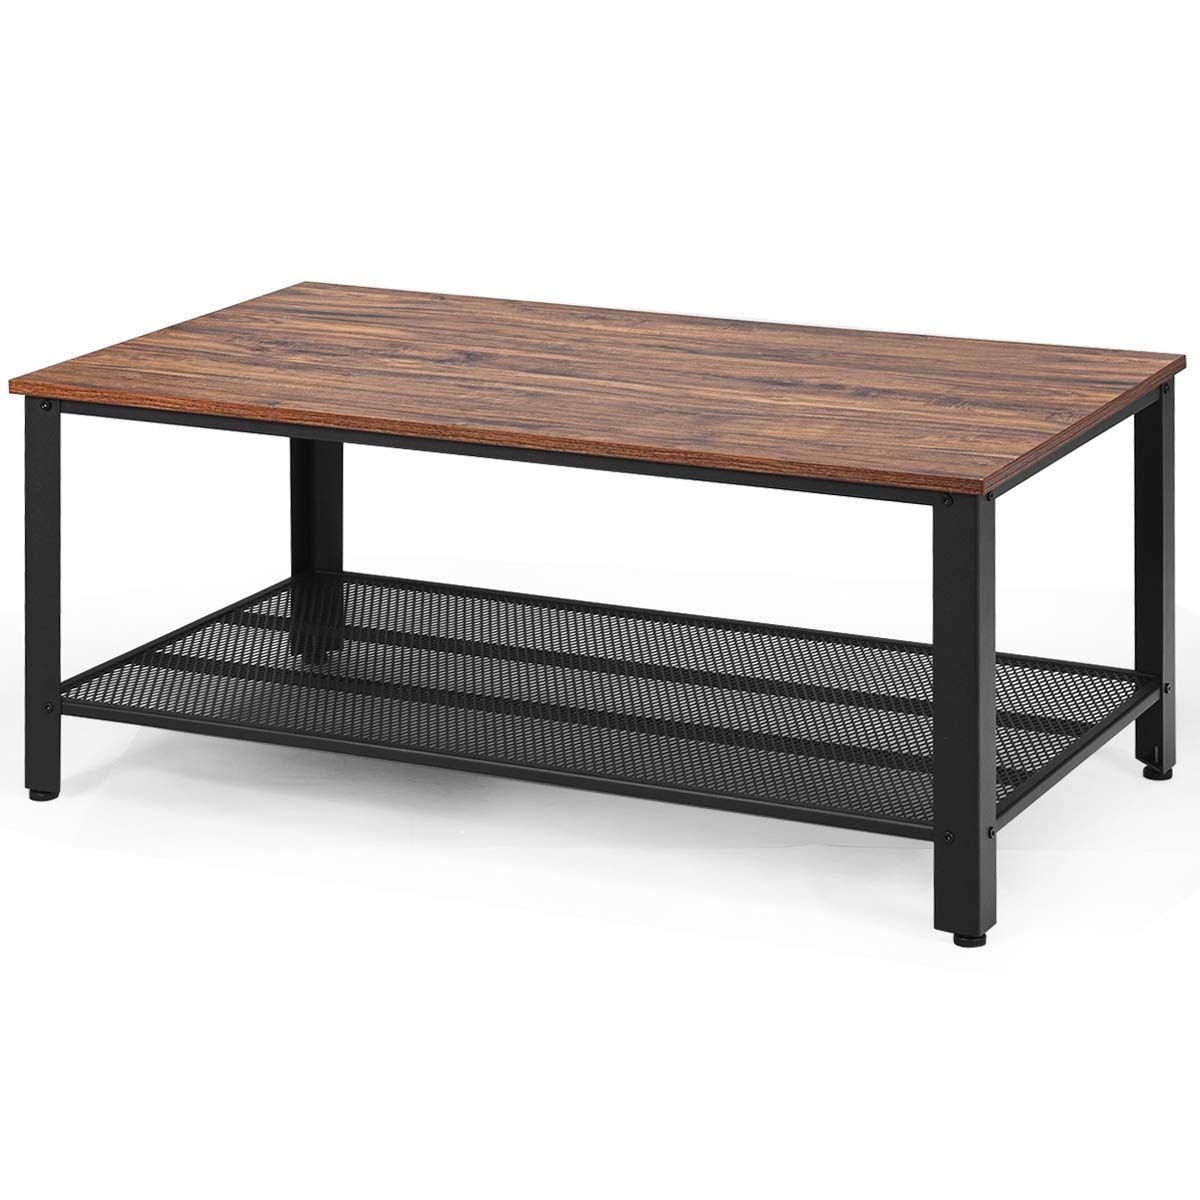 Giantex Coffee Table 42 Inch W/storage Shelf And Within Pecan Brown Triangular Coffee Tables (View 11 of 15)